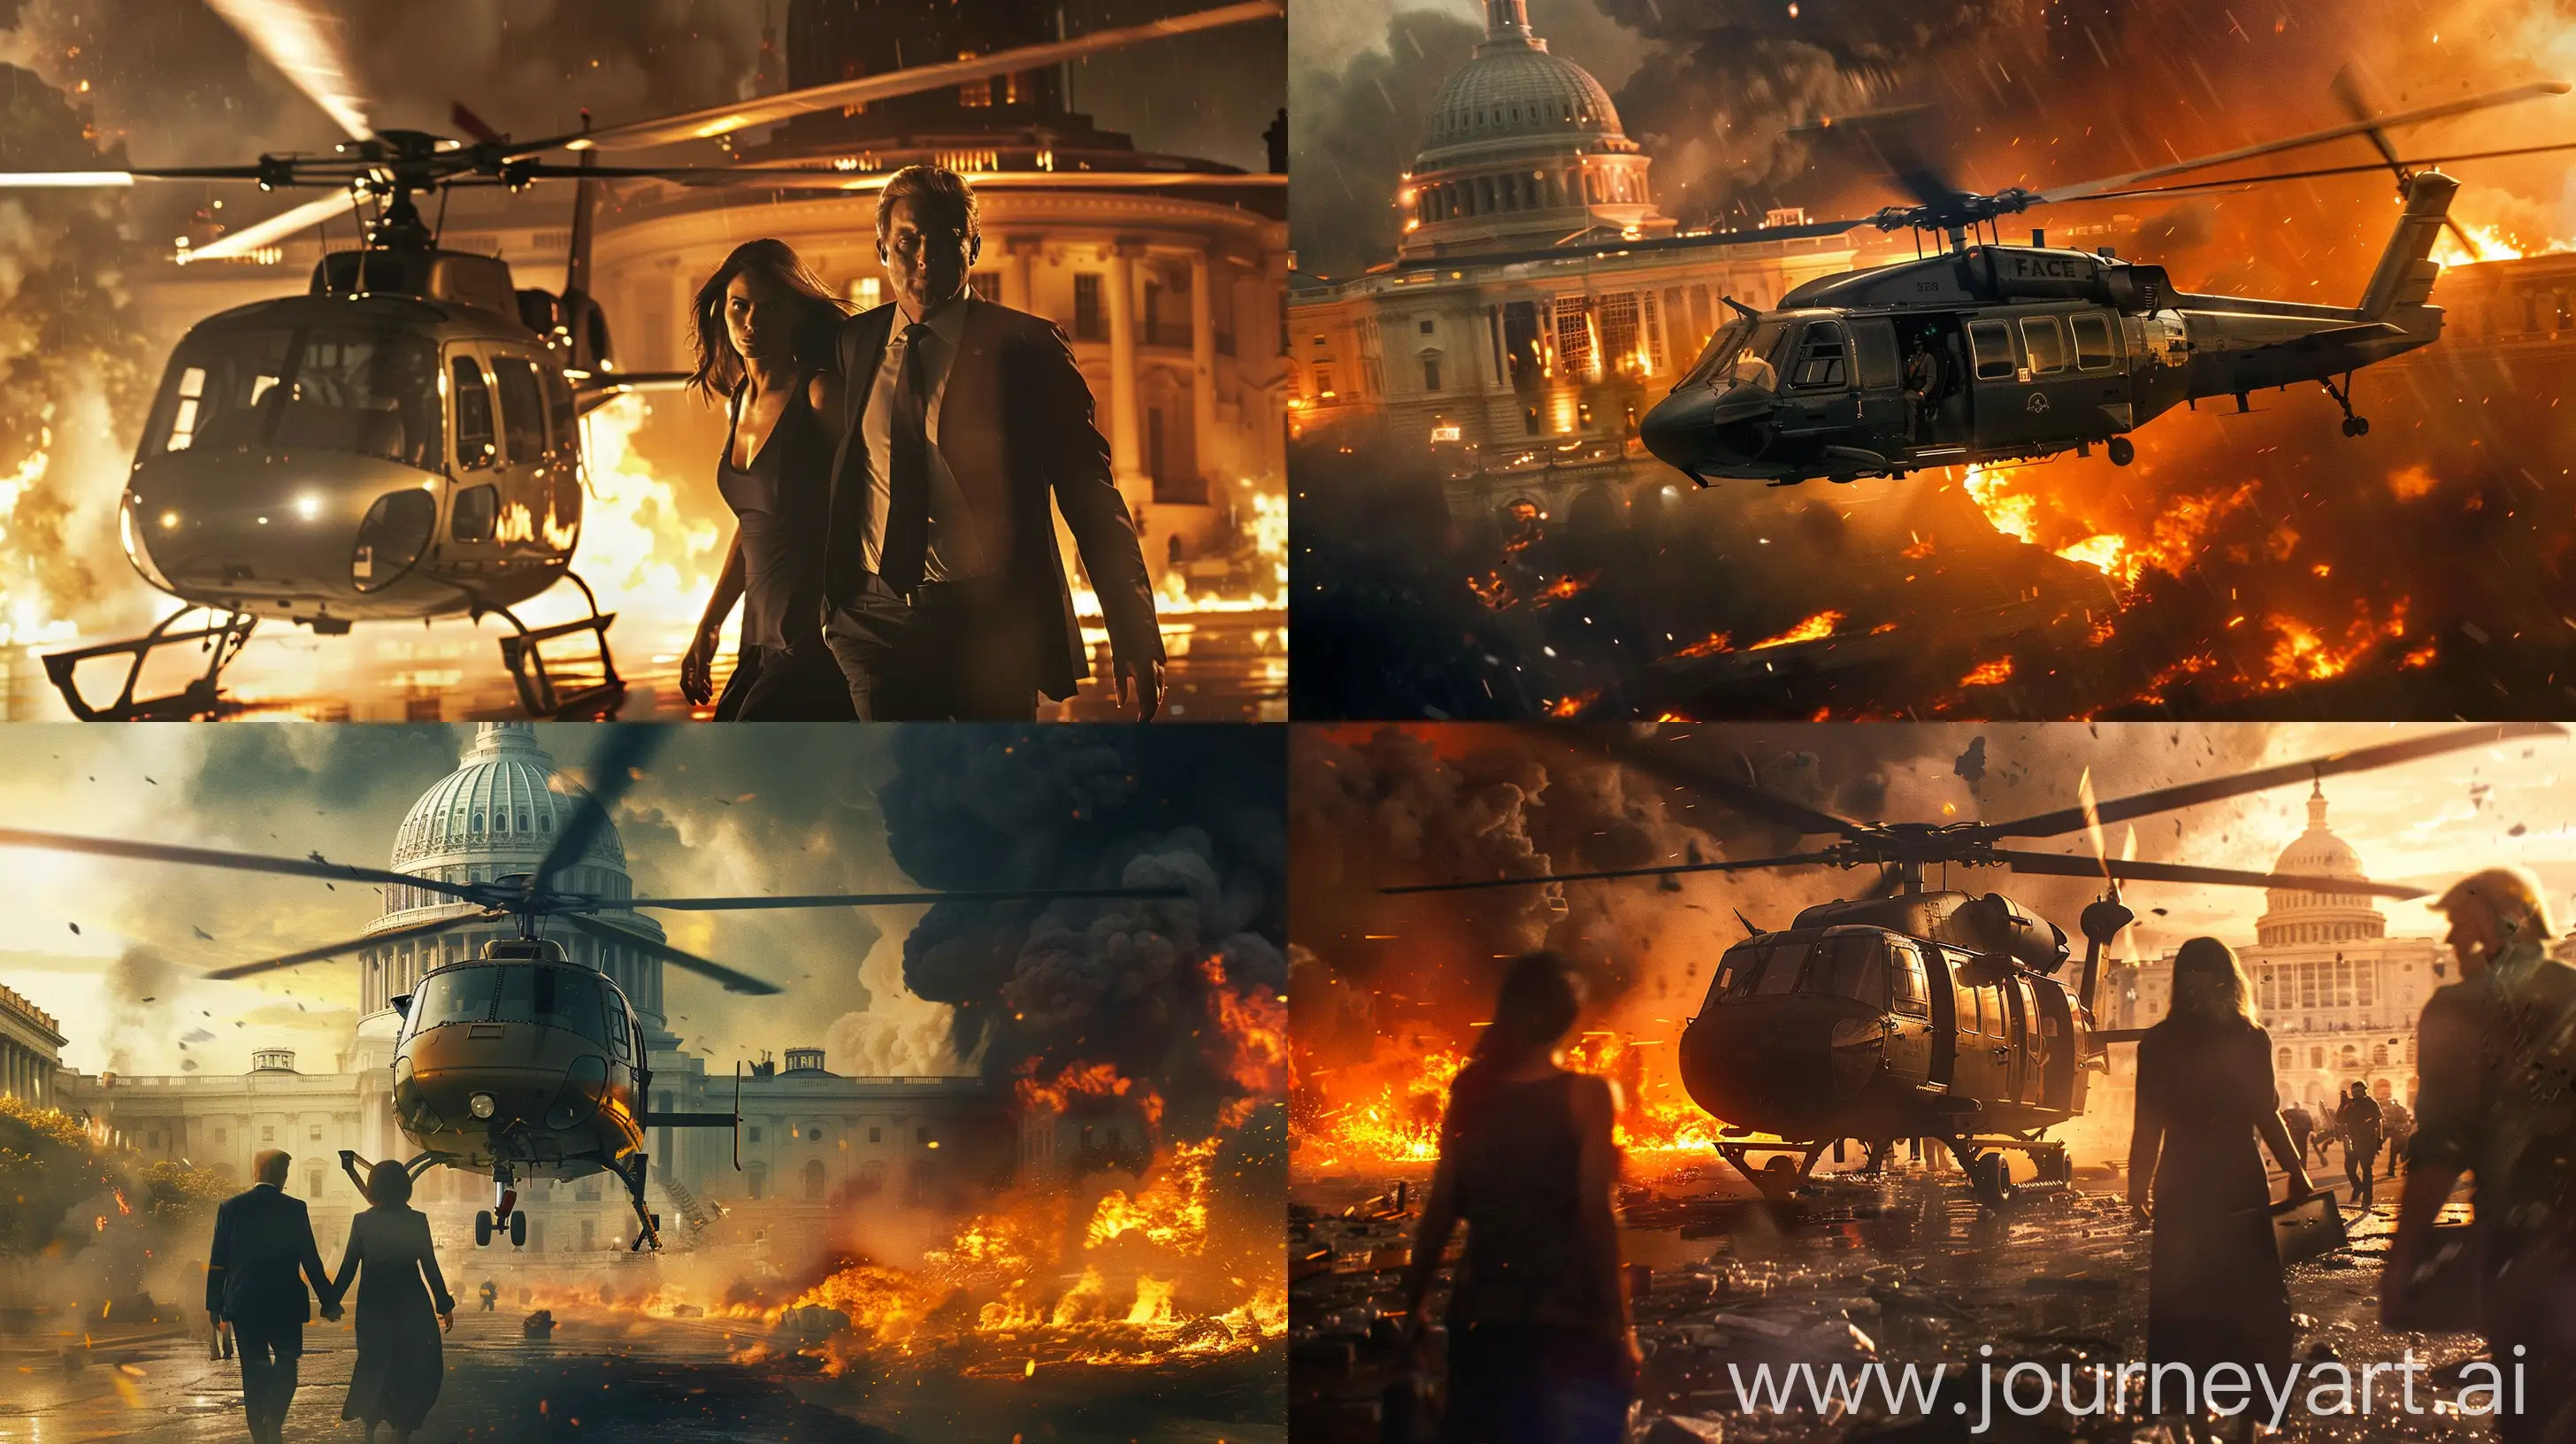 THe president and first lady are evacuated by helicopter while Washington DC burns below them, cinematic --v 6.0 --ar 16:9